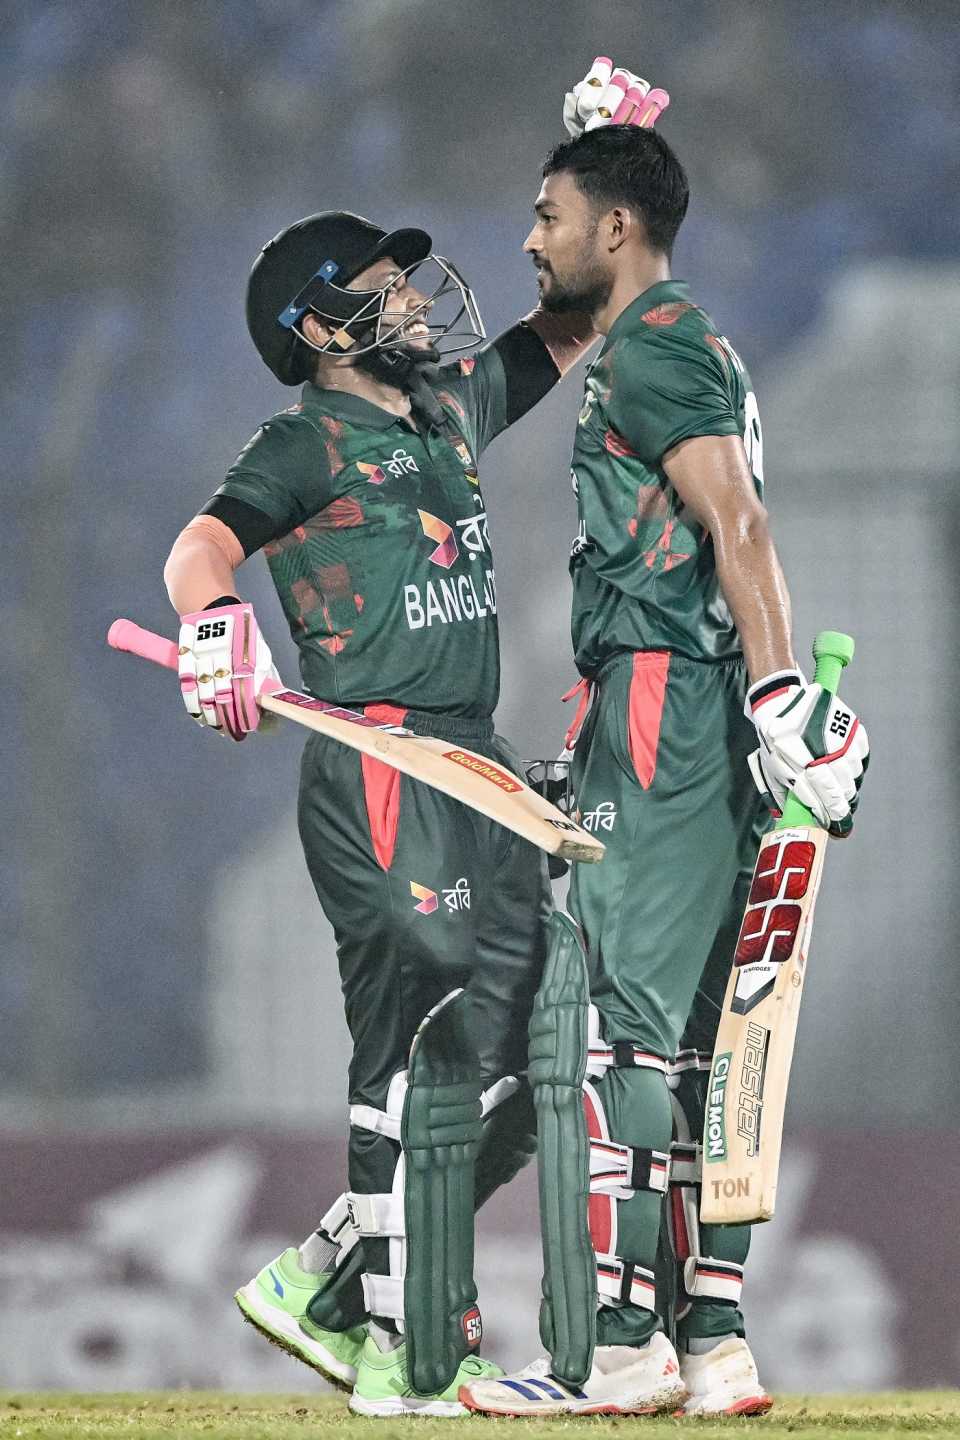 Najmul Hossain Shanto and Mushfiqur Rahim added an undefeated 165 runs for the fifth wicket